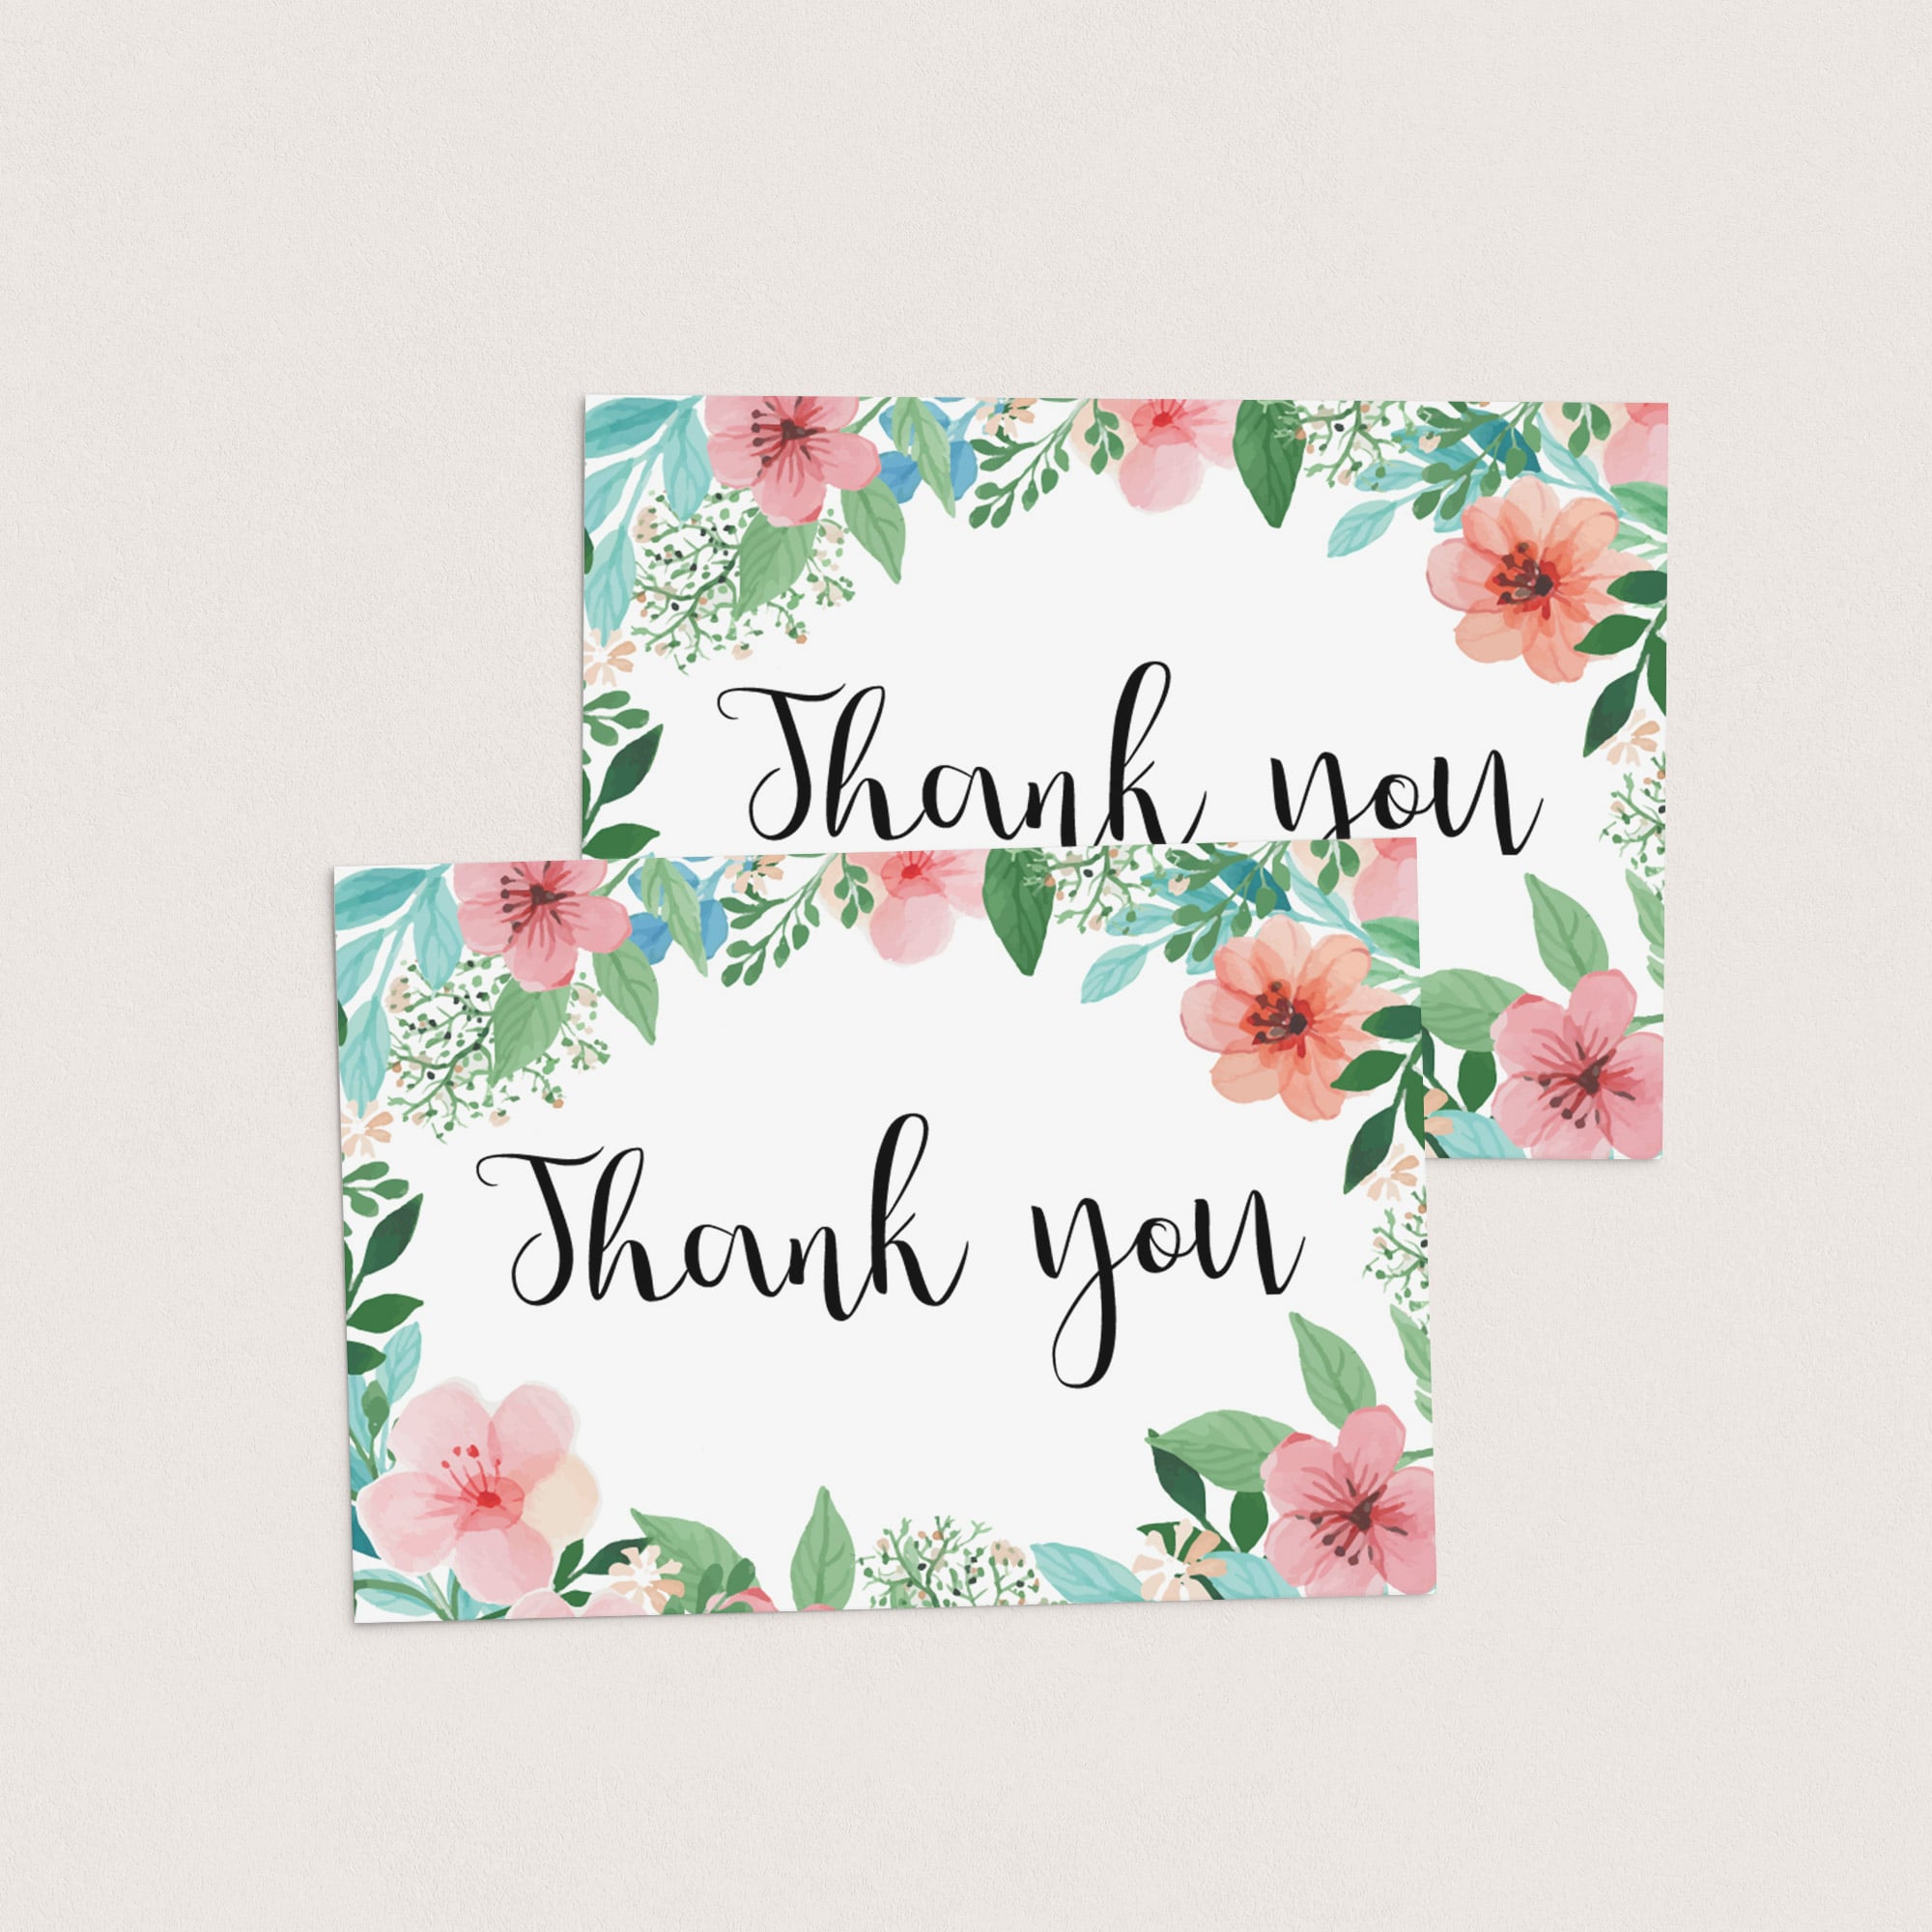 Baby shower thank you cards for floral themed baby shower by LittleSizzle